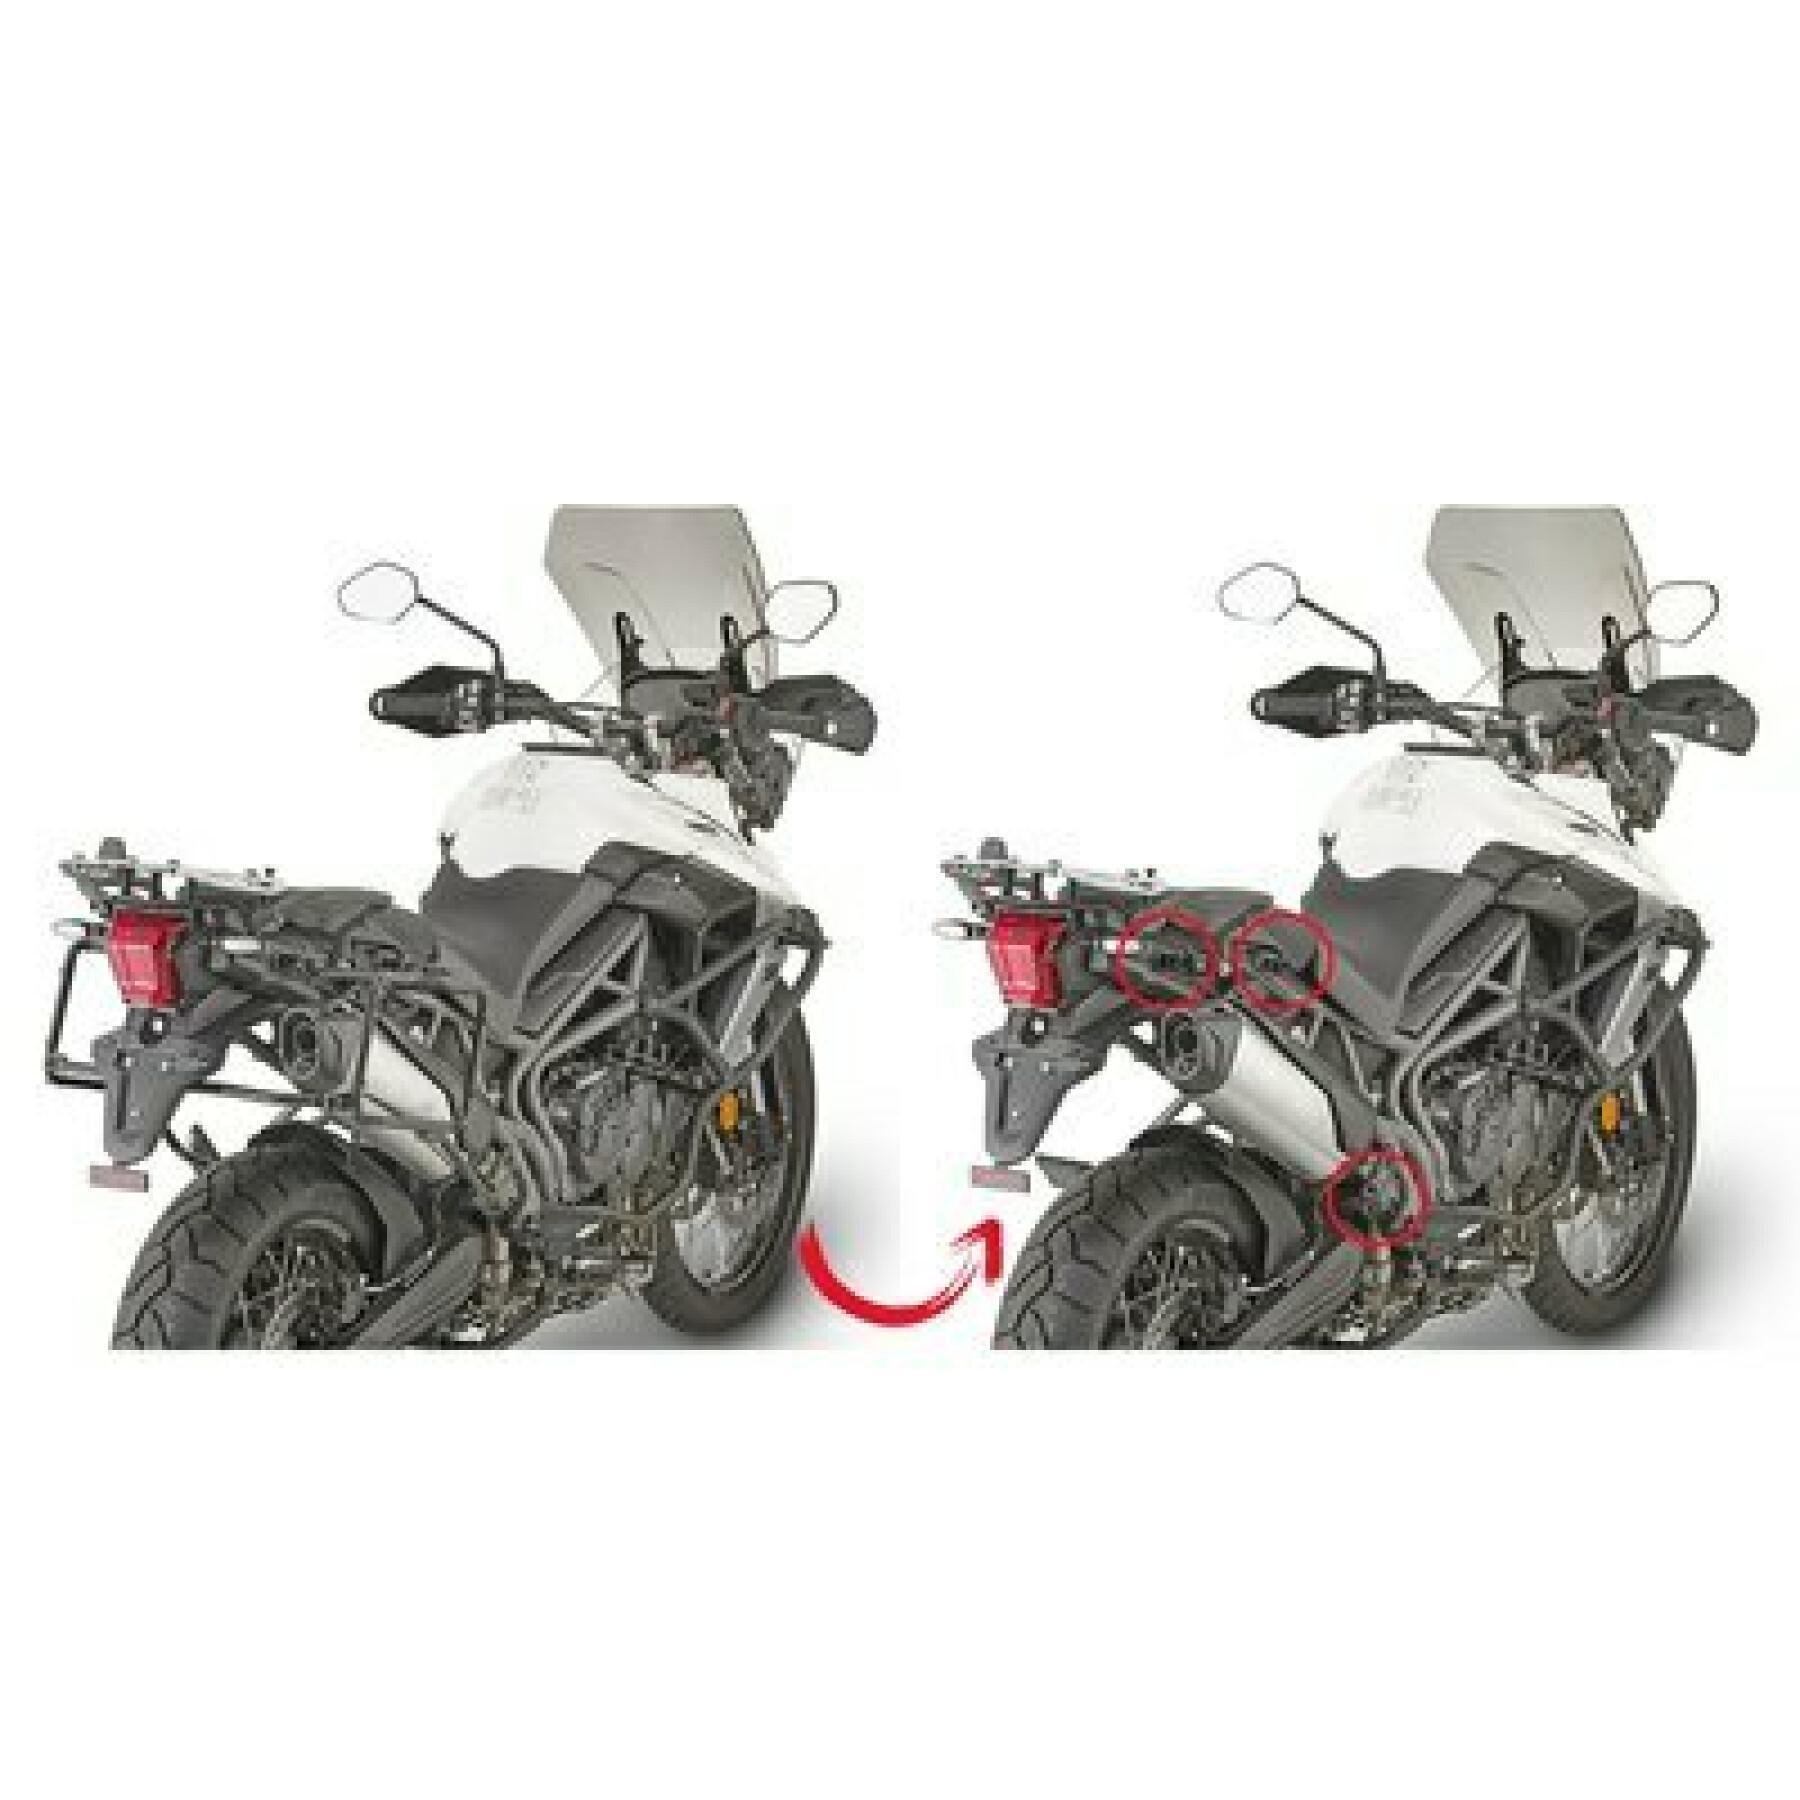 Support valise rapide Givi Triumph tiger 800/XC/XR 18